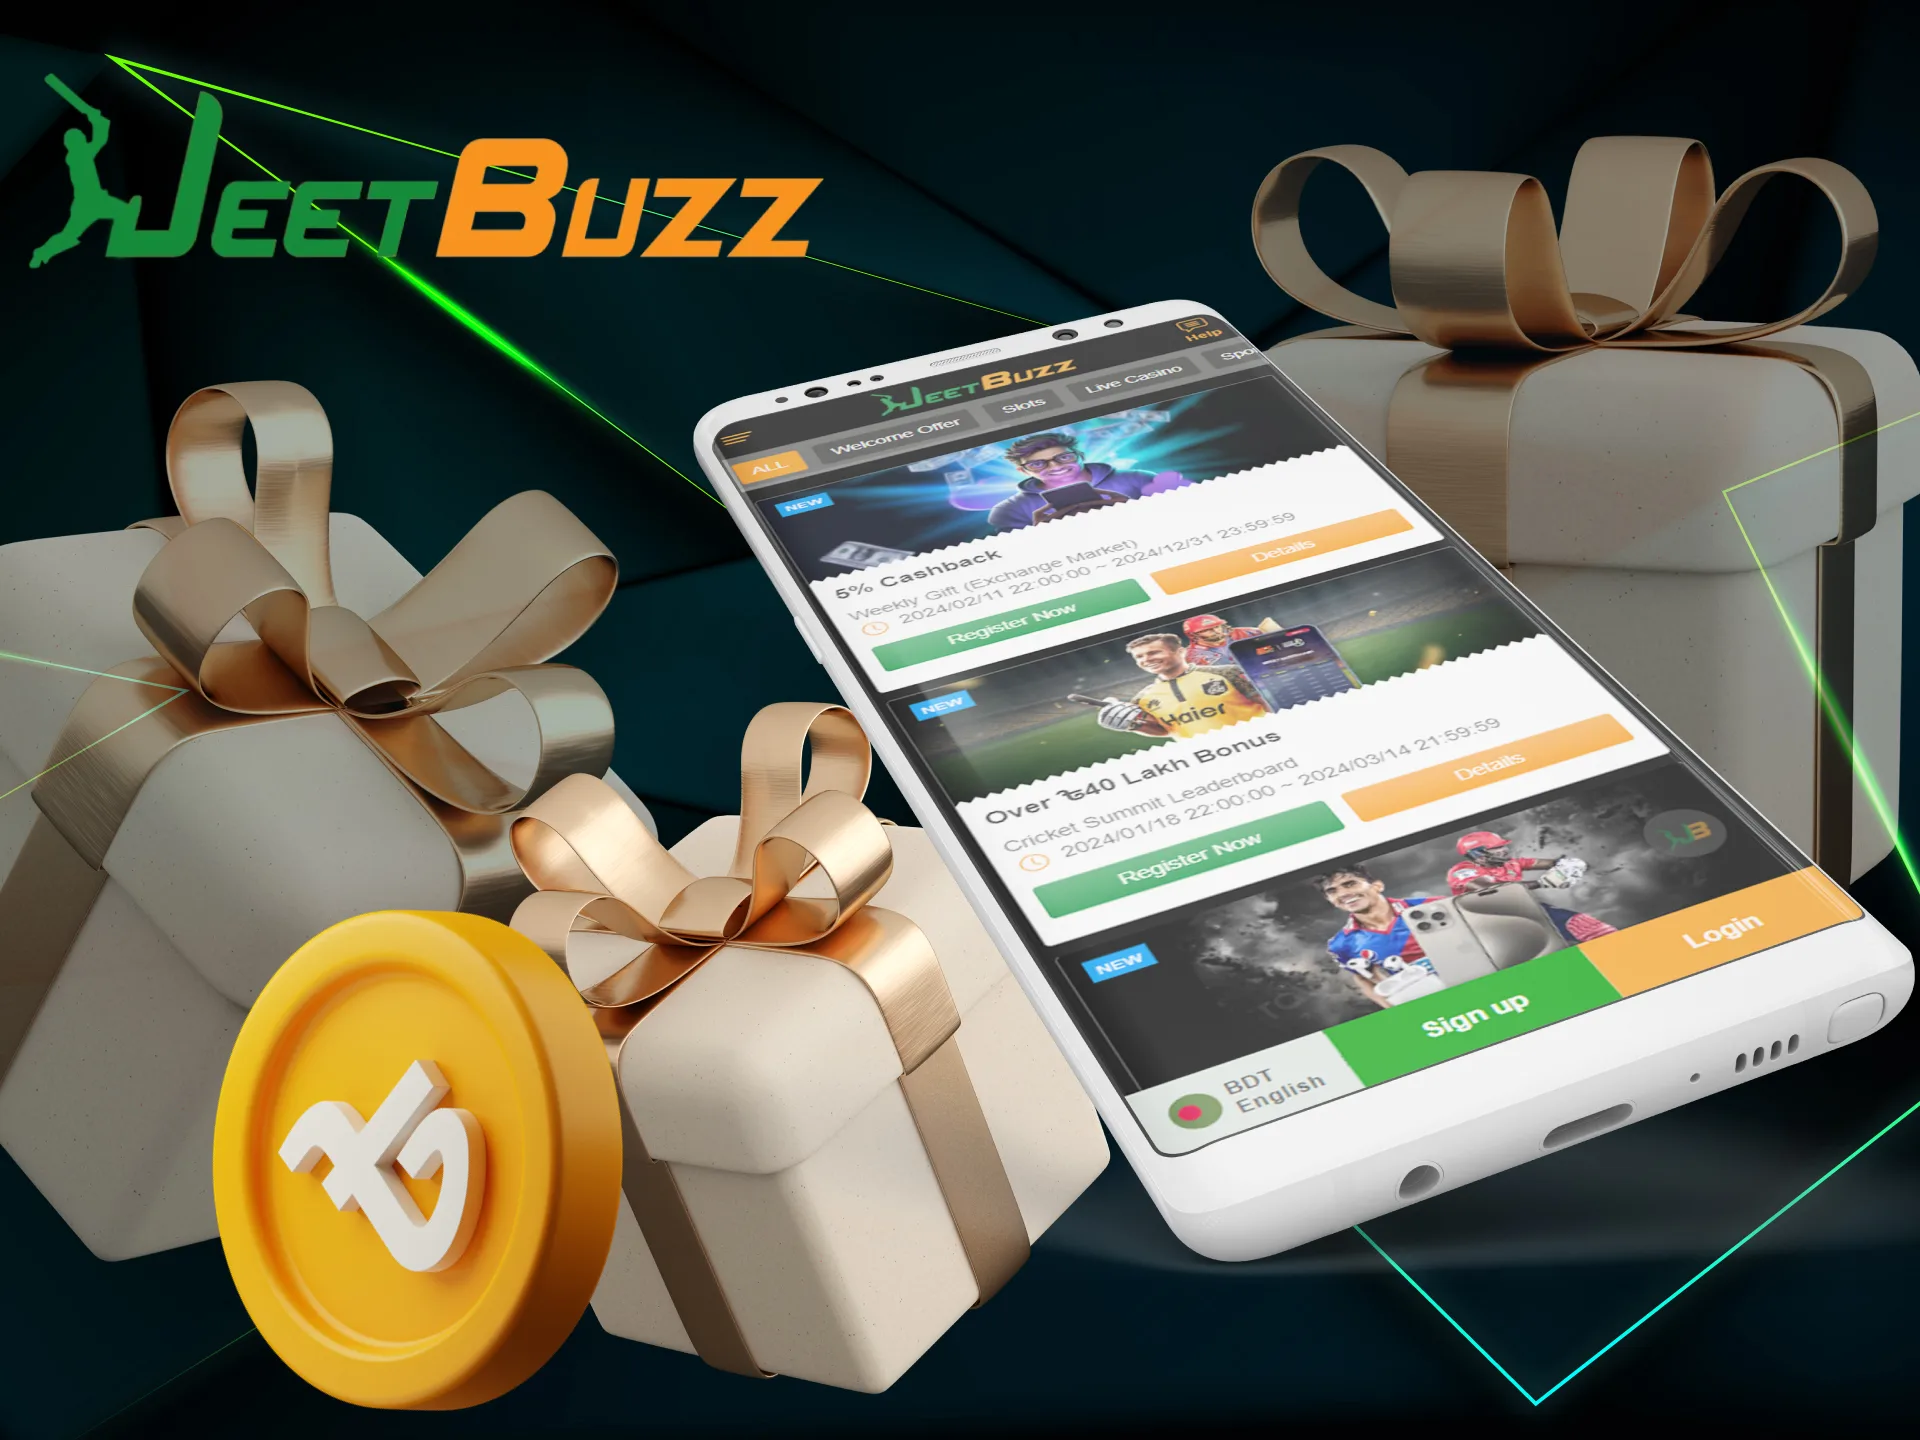 JeetBuzz welcome bonuses are waiting for you right after you register and make your first deposit.